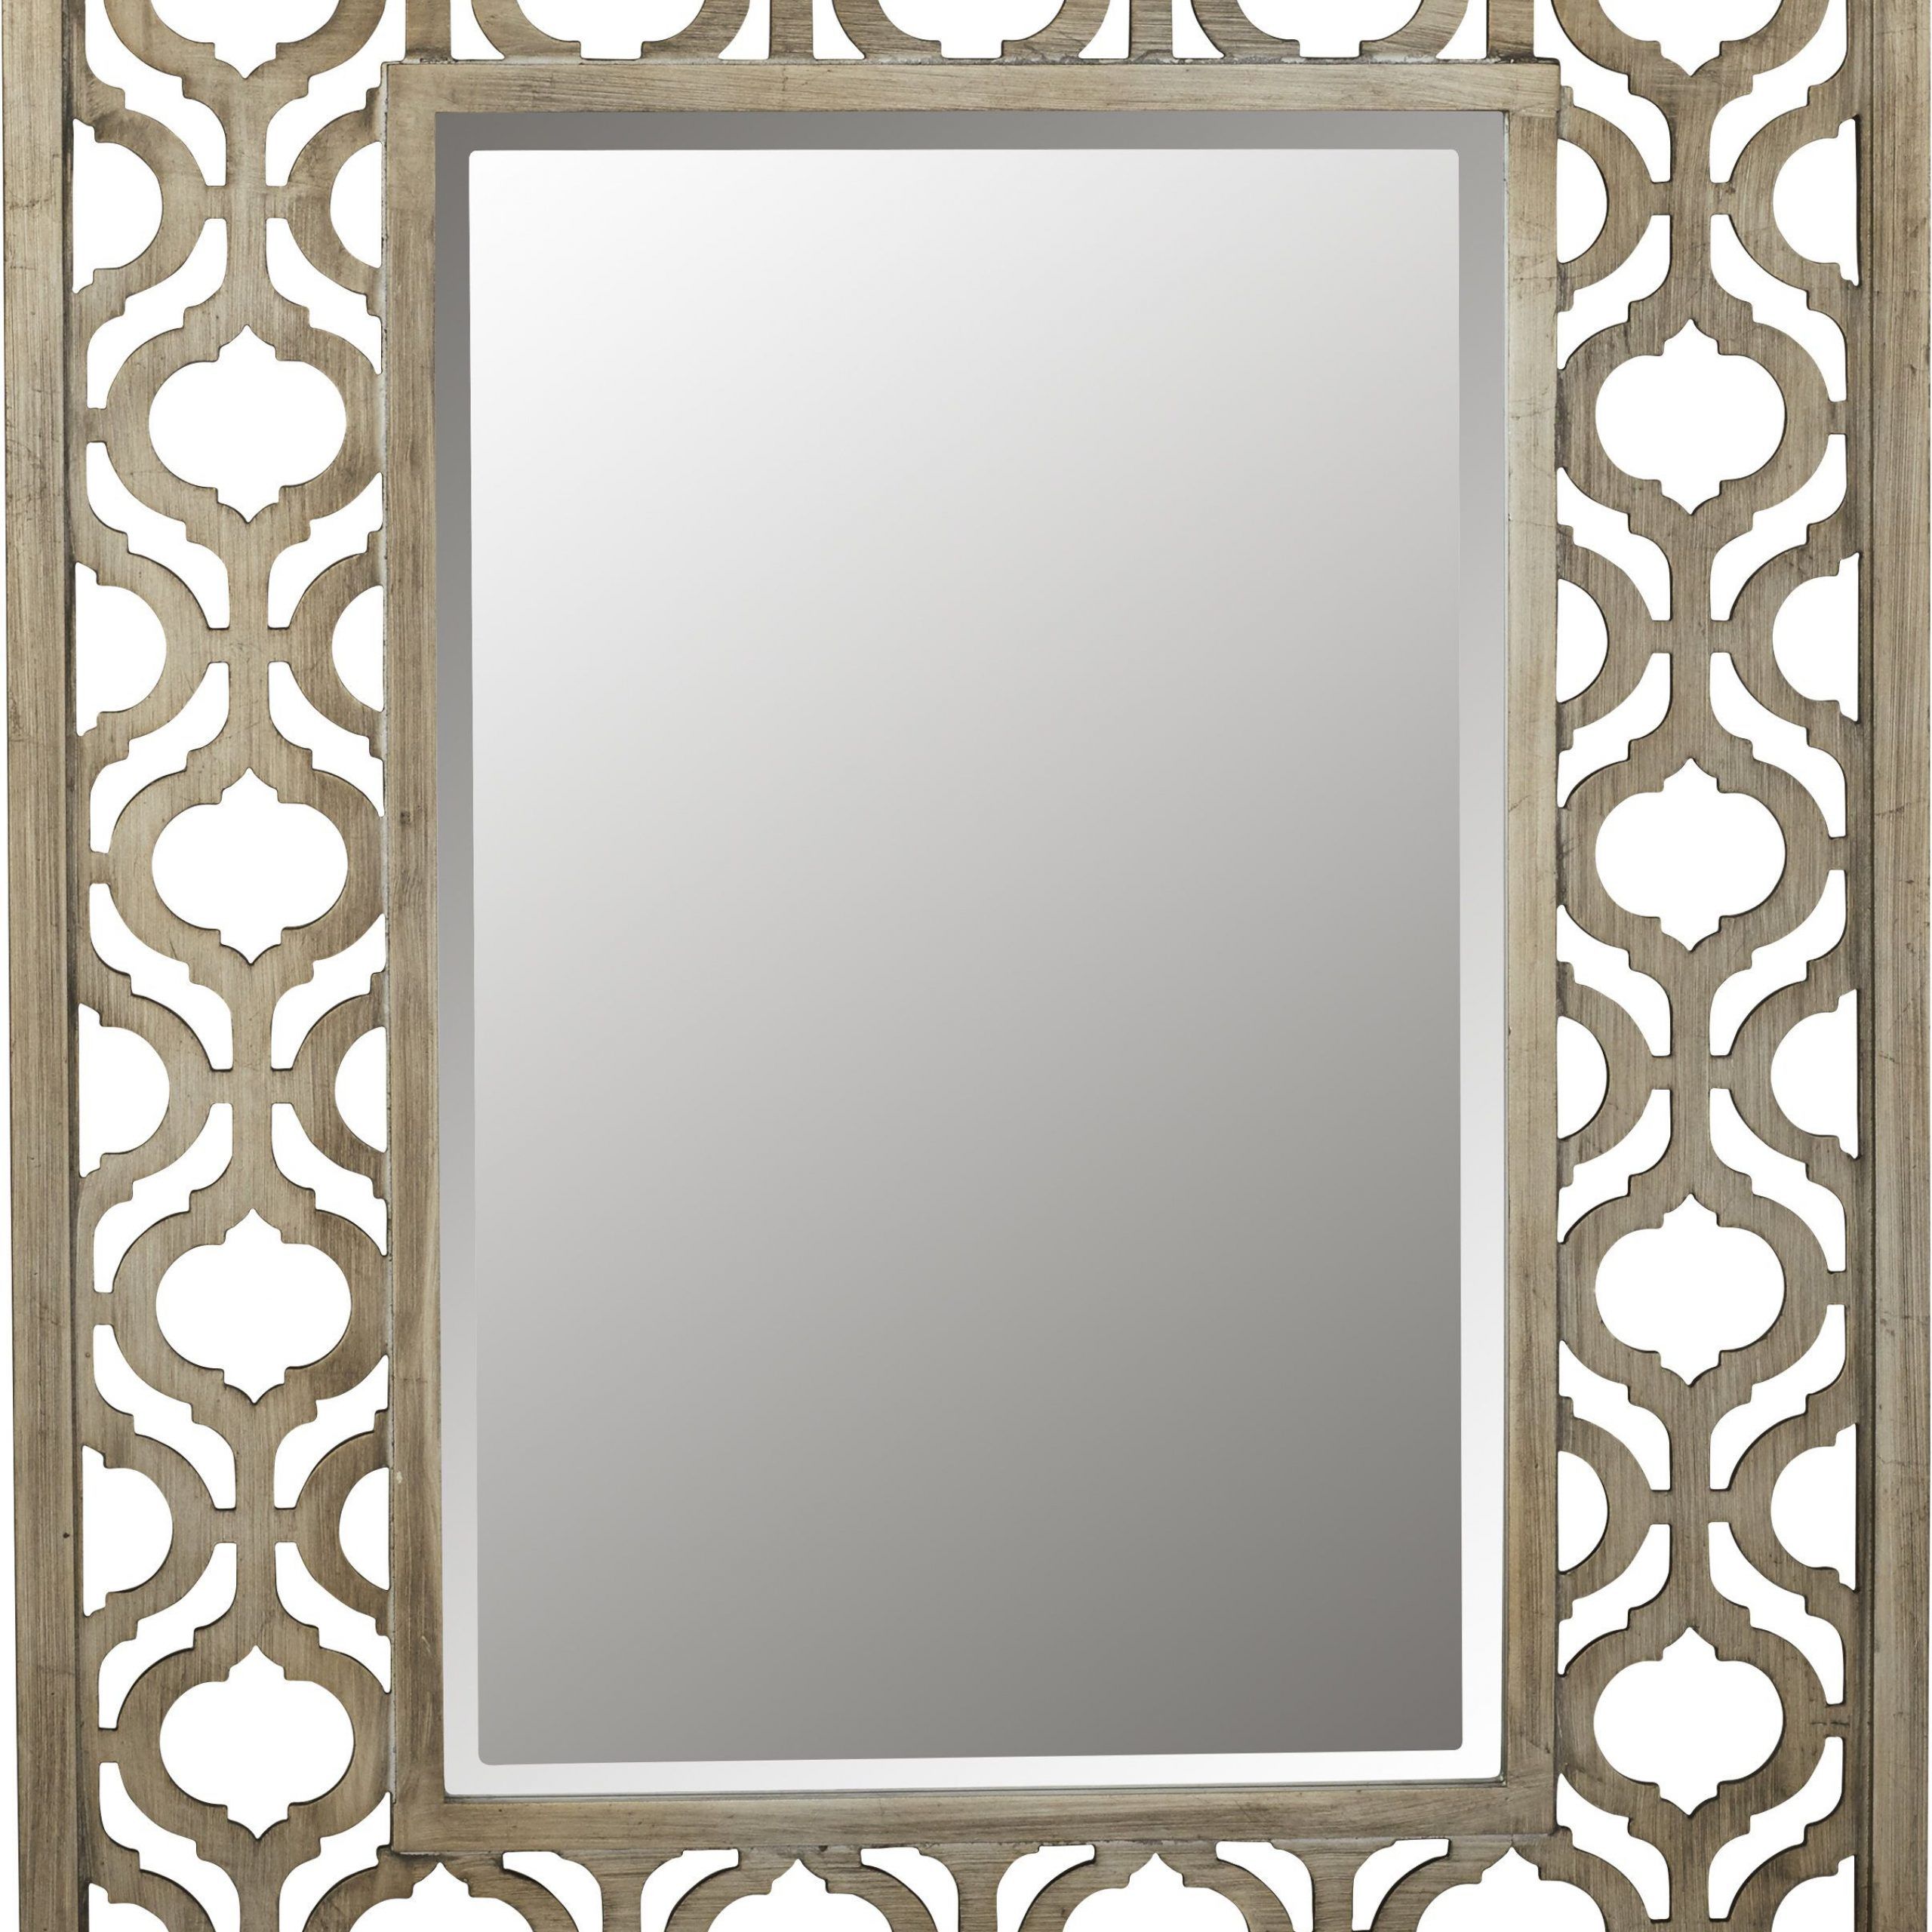 Ulus Accent Mirror | Traditional Wall Mirrors, Oversized Wall Mirrors Throughout Ulus Accent Mirrors (View 6 of 15)